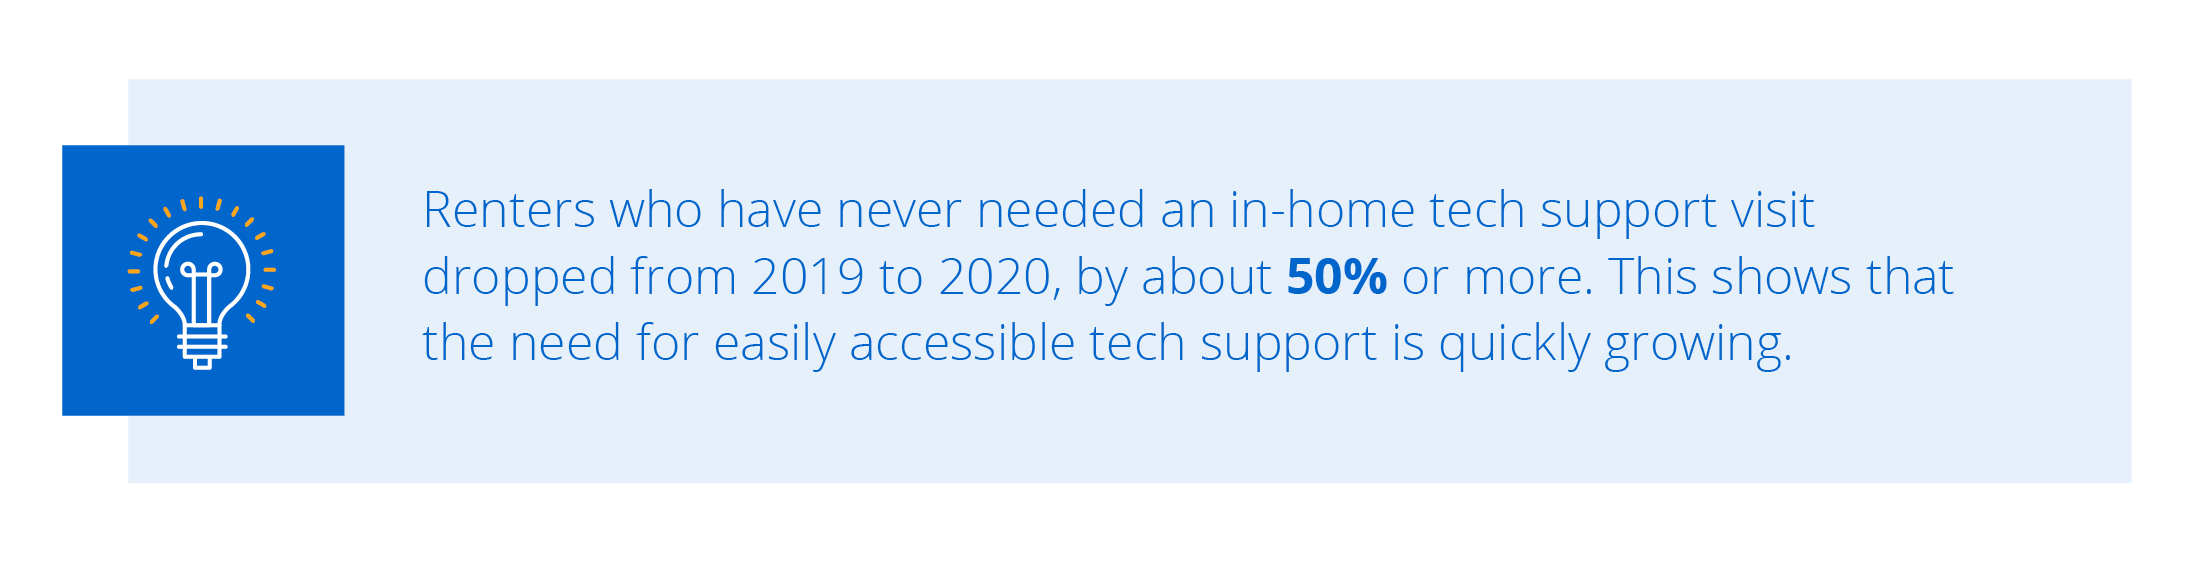 Renters who have never needed an in-home tech support visit dropped from 2019 to 2020, by about 50% or more.